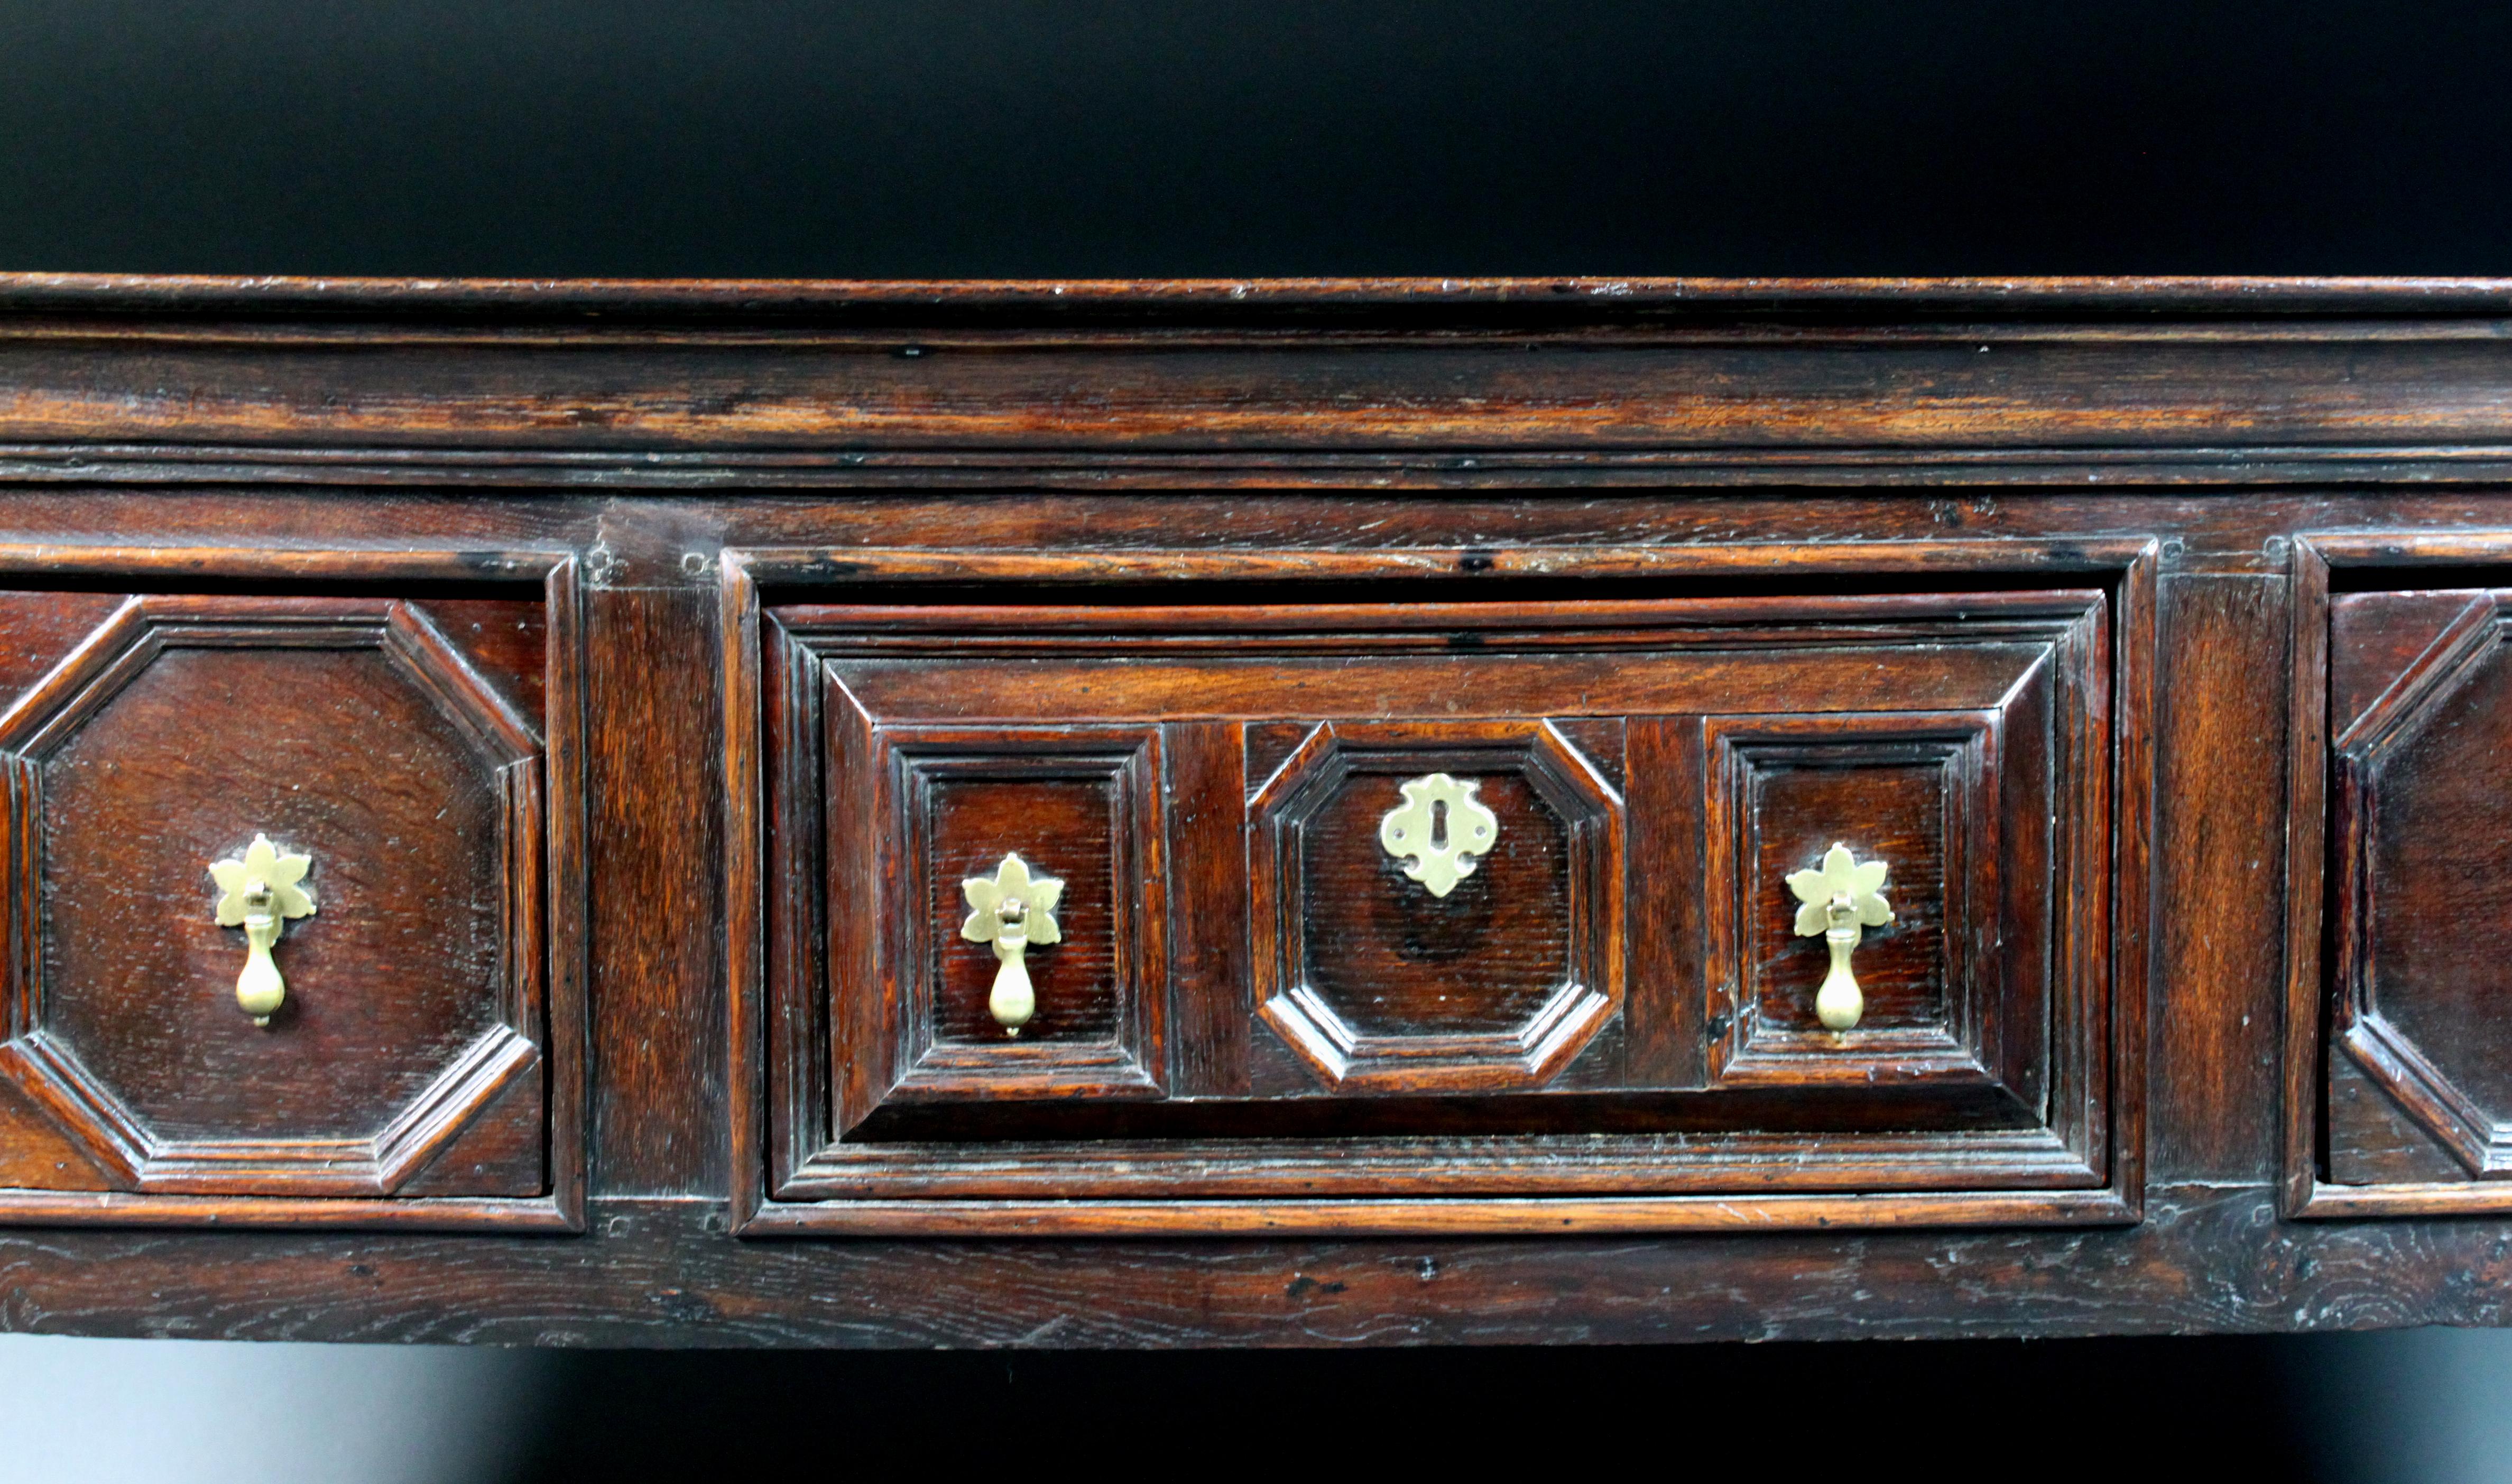 English 17th Century Oak Serving Dresser with Geometric Moulding on the Drawers